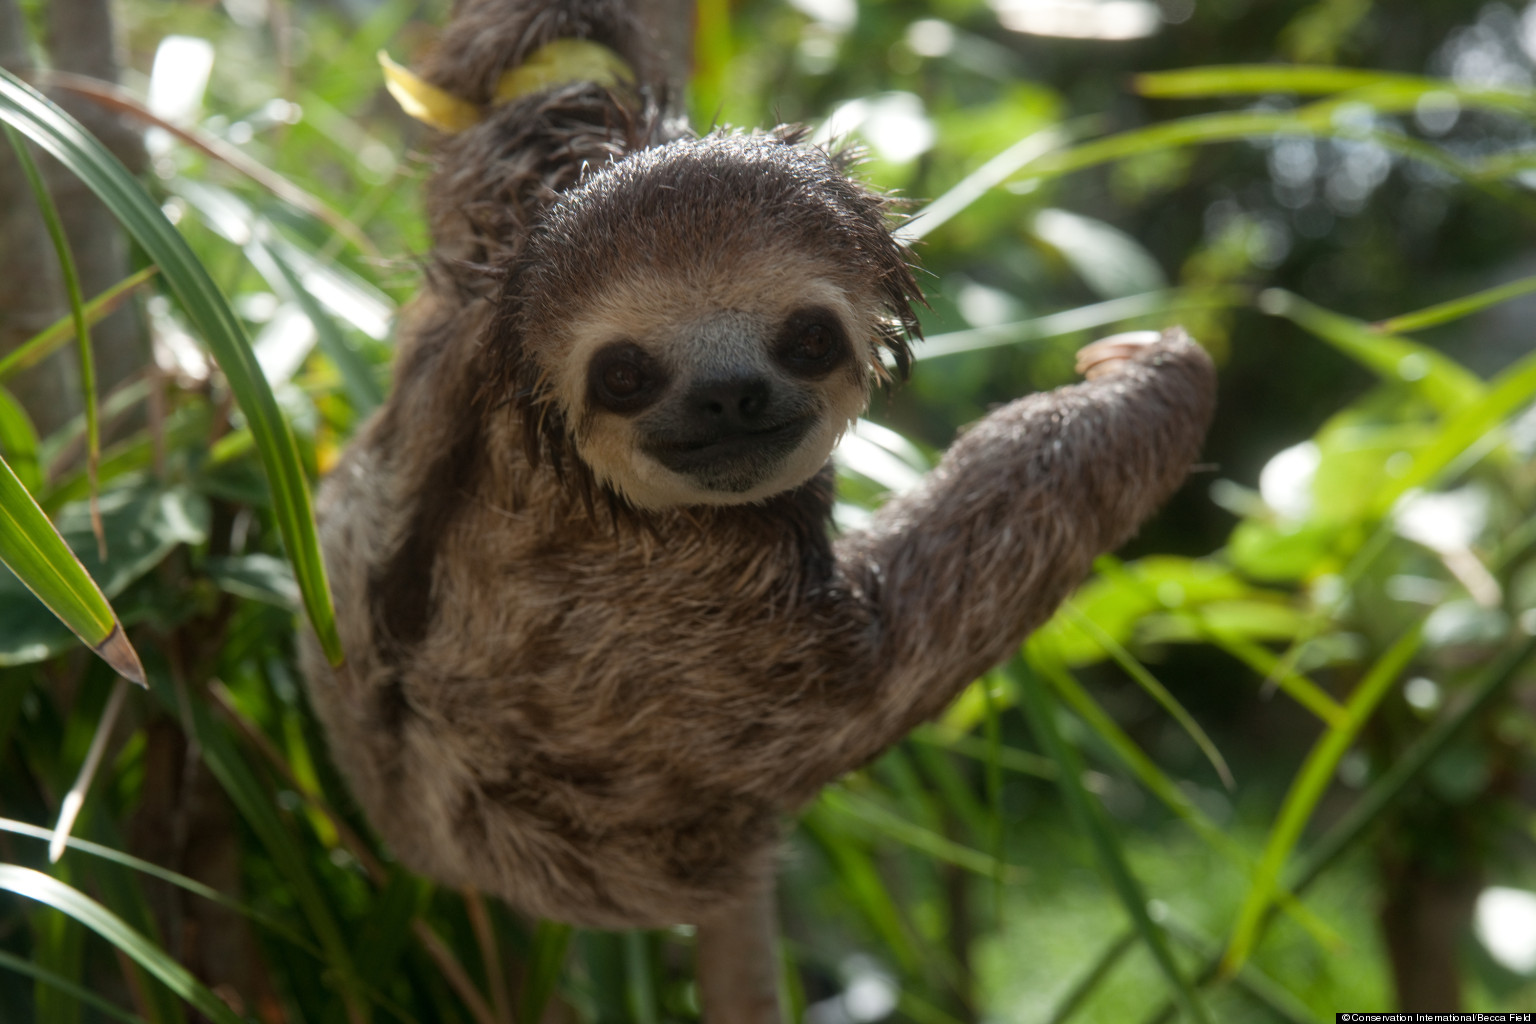 Sloth Image Feature Photogenic Creatures Rescued